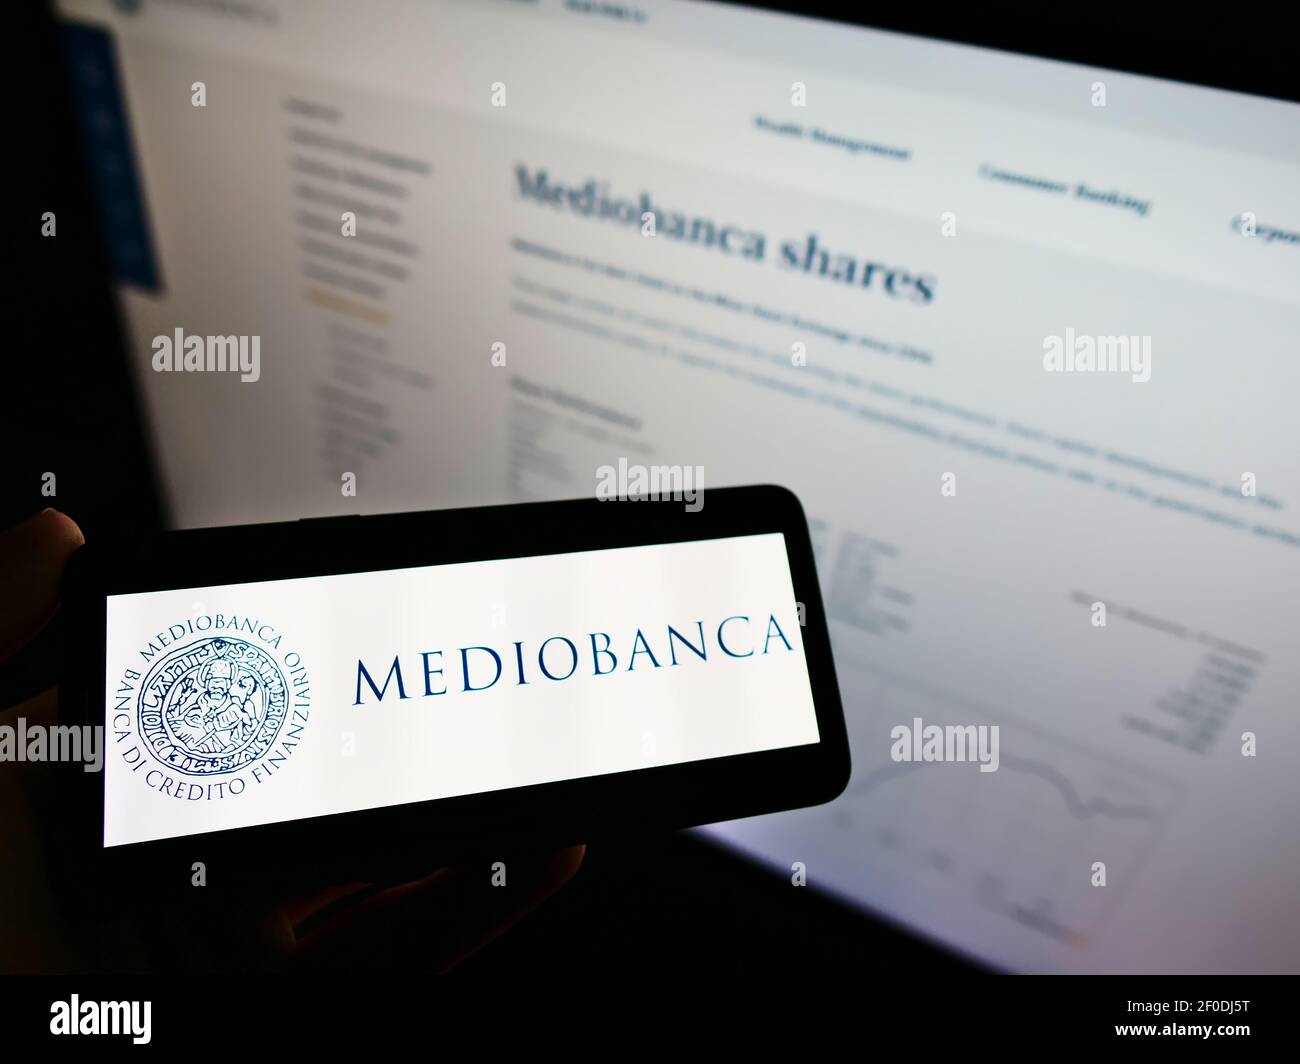 Person holding cellphone with business logo of Italian bank Mediobanca S.p.A. on screen in front of company webpage. Focus on phone display. Stock Photo